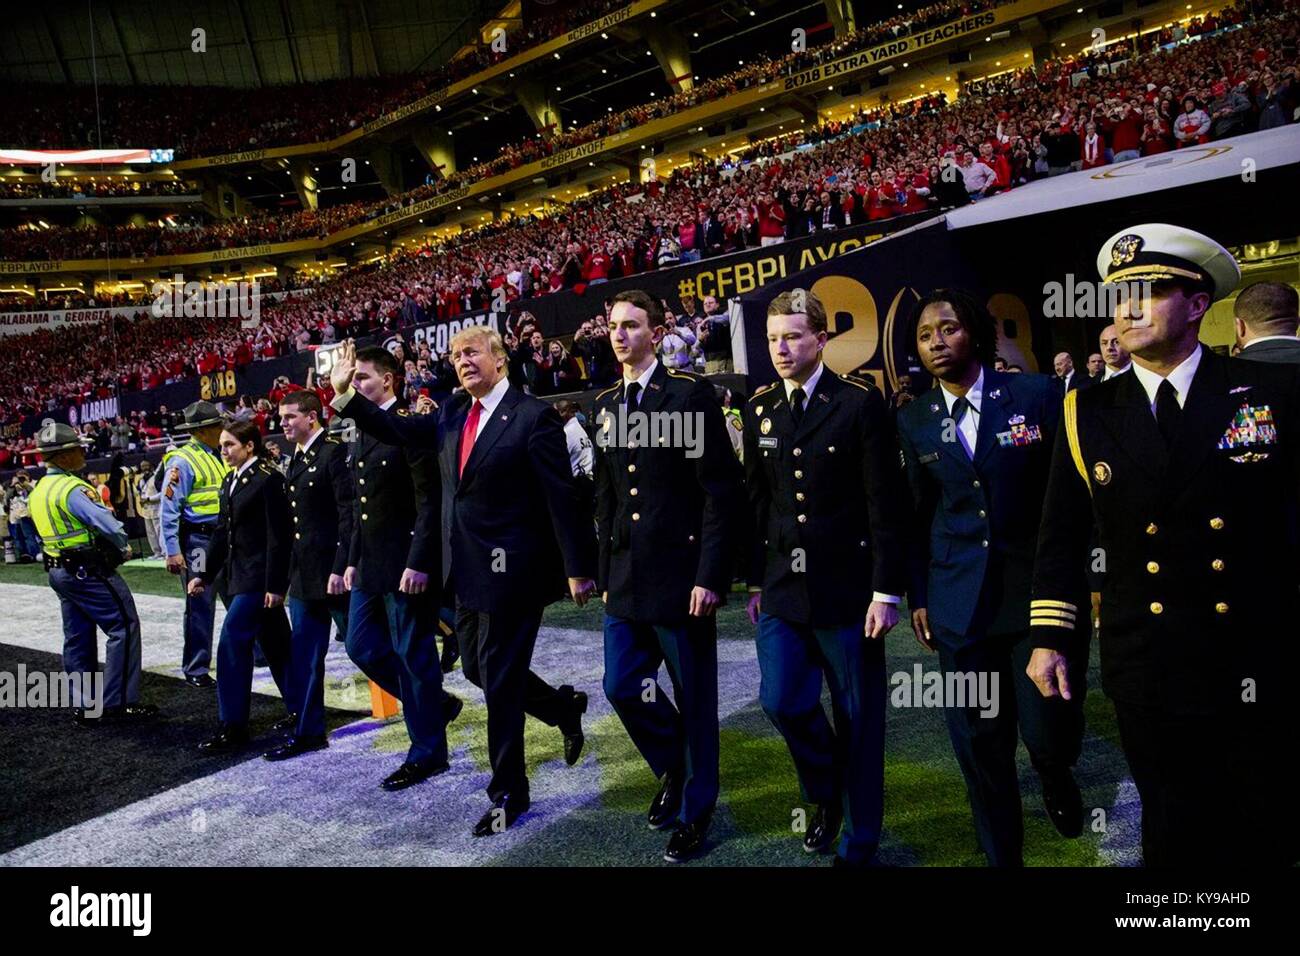 U.S. President Donald Trump waves as he walks on to the field for the NCAA College Football Playoff National Championship between the University of Alabama Crimson Tide and the University of Georgia Bulldogs January 8, 2018 in Atlanta, Georgia. Stock Photo